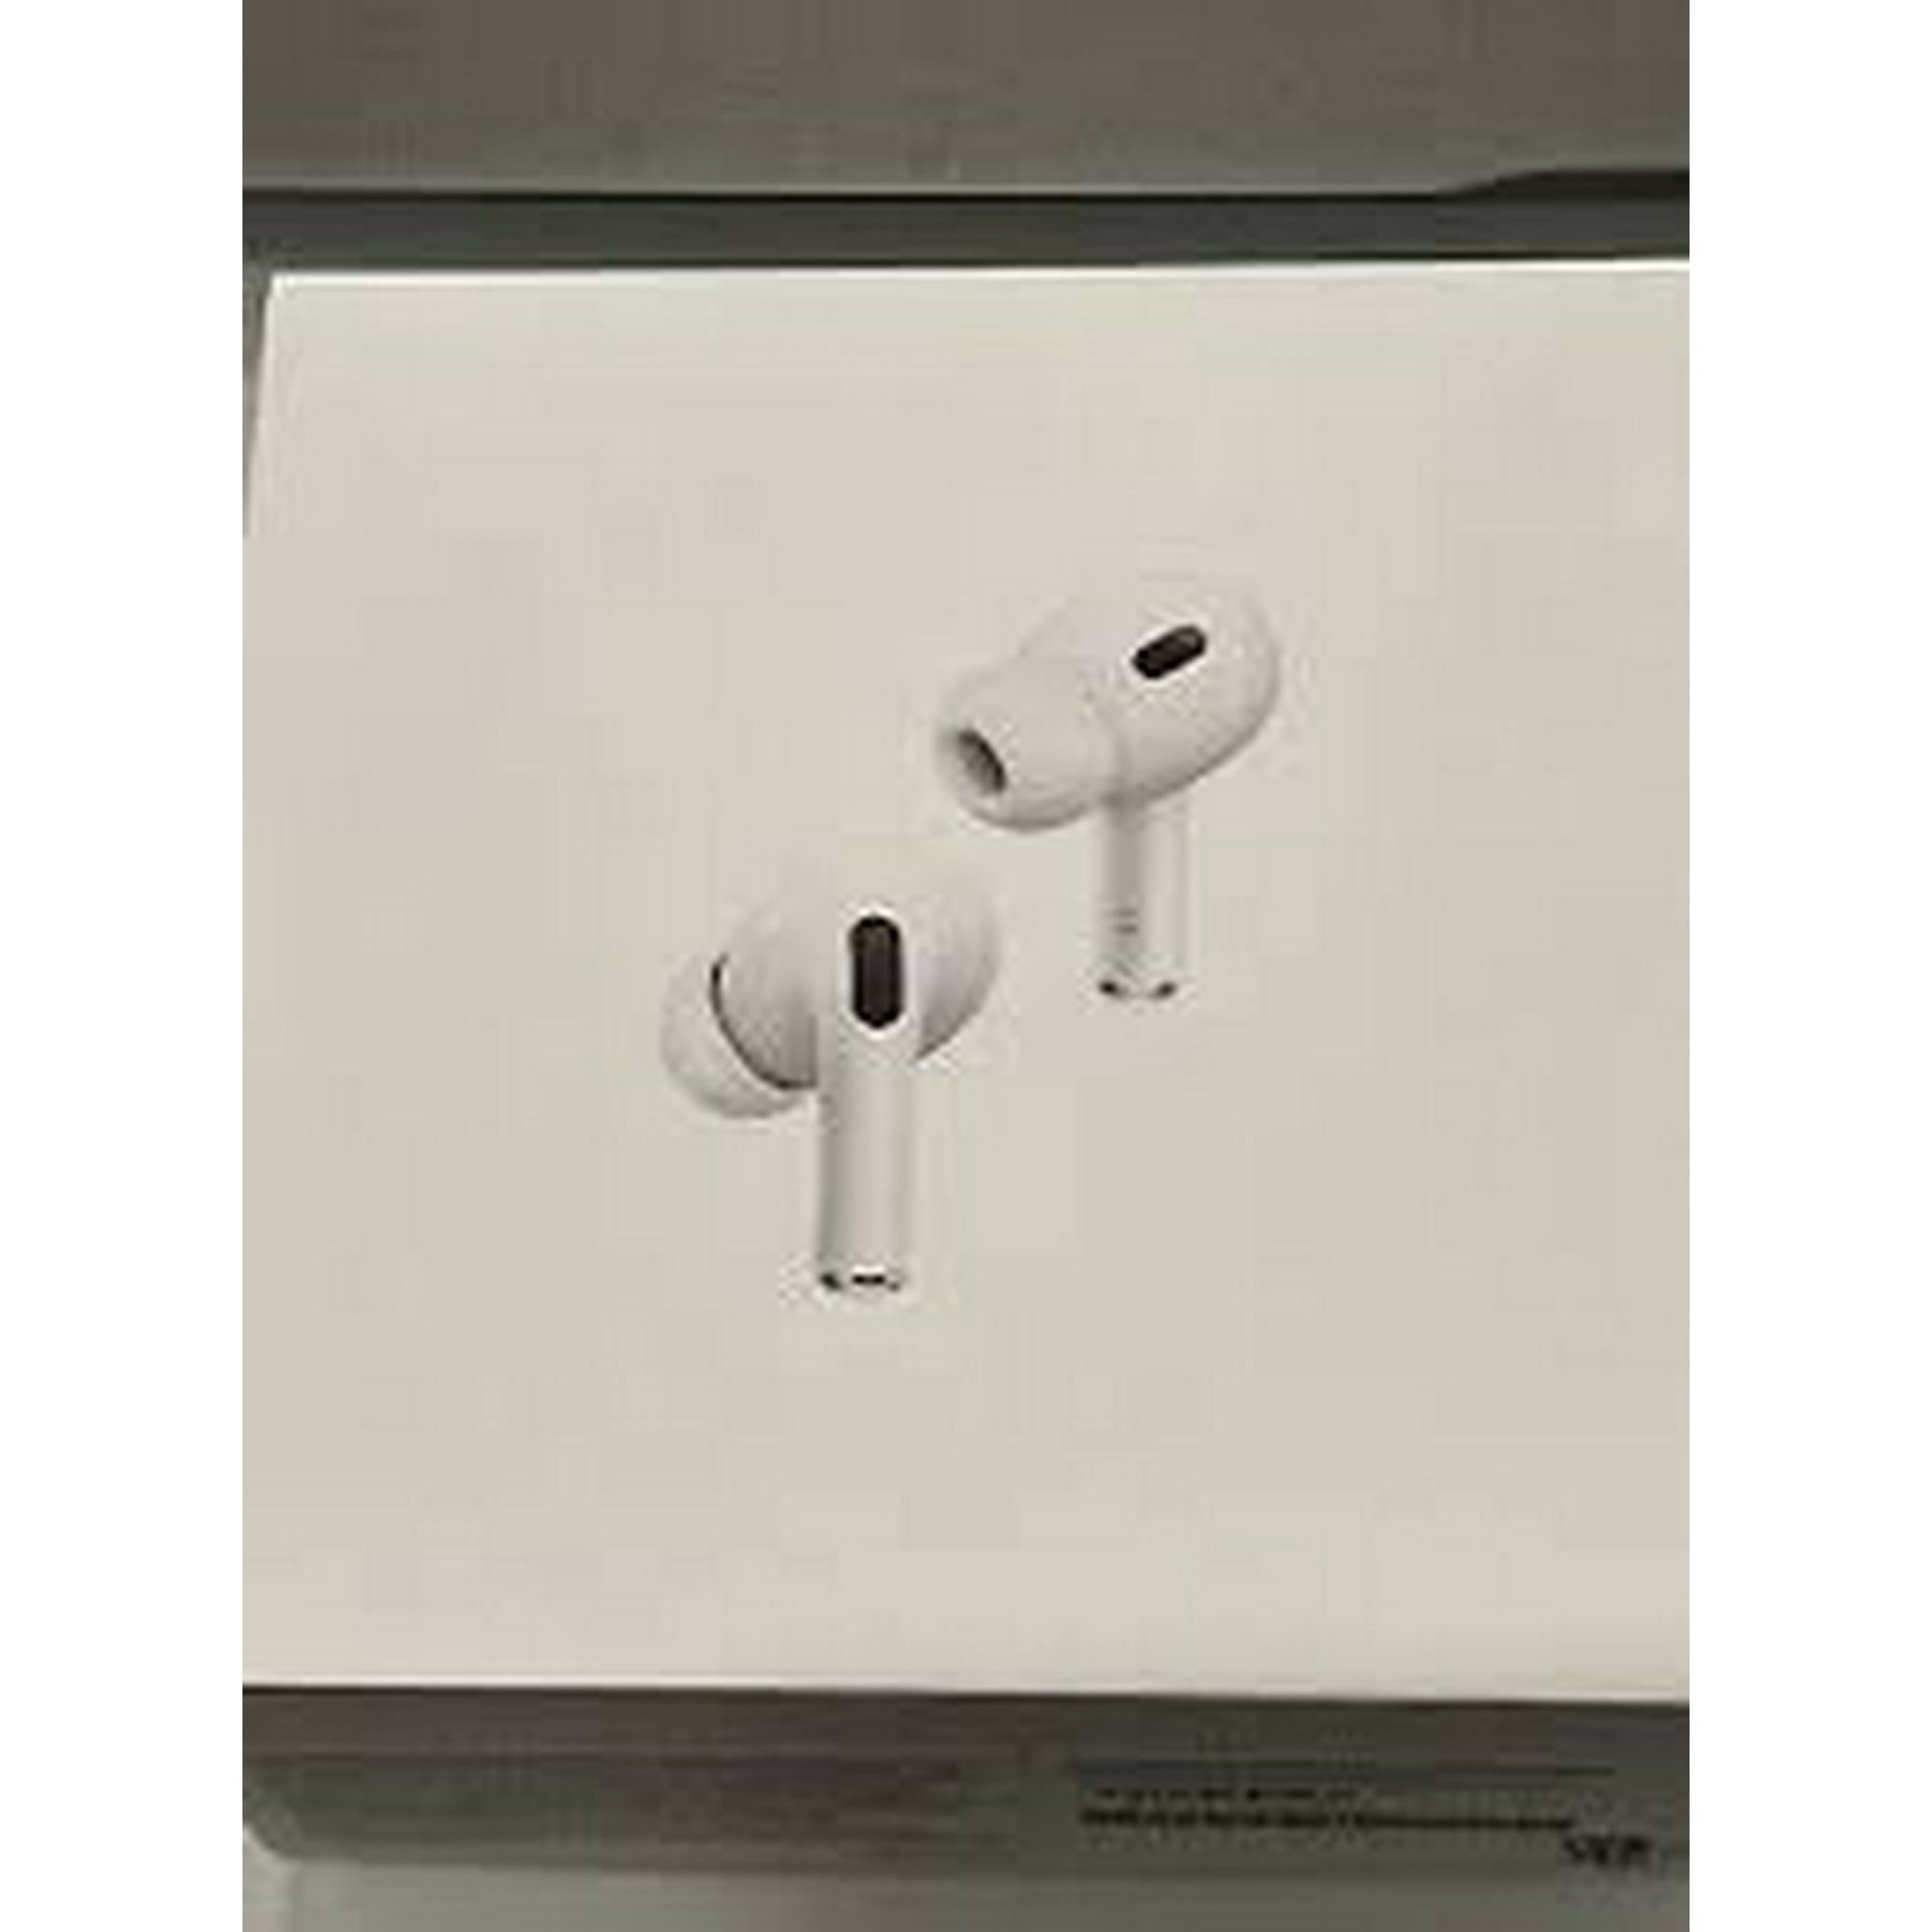 Apple AirPods Pro 2nd Generation - Brand New